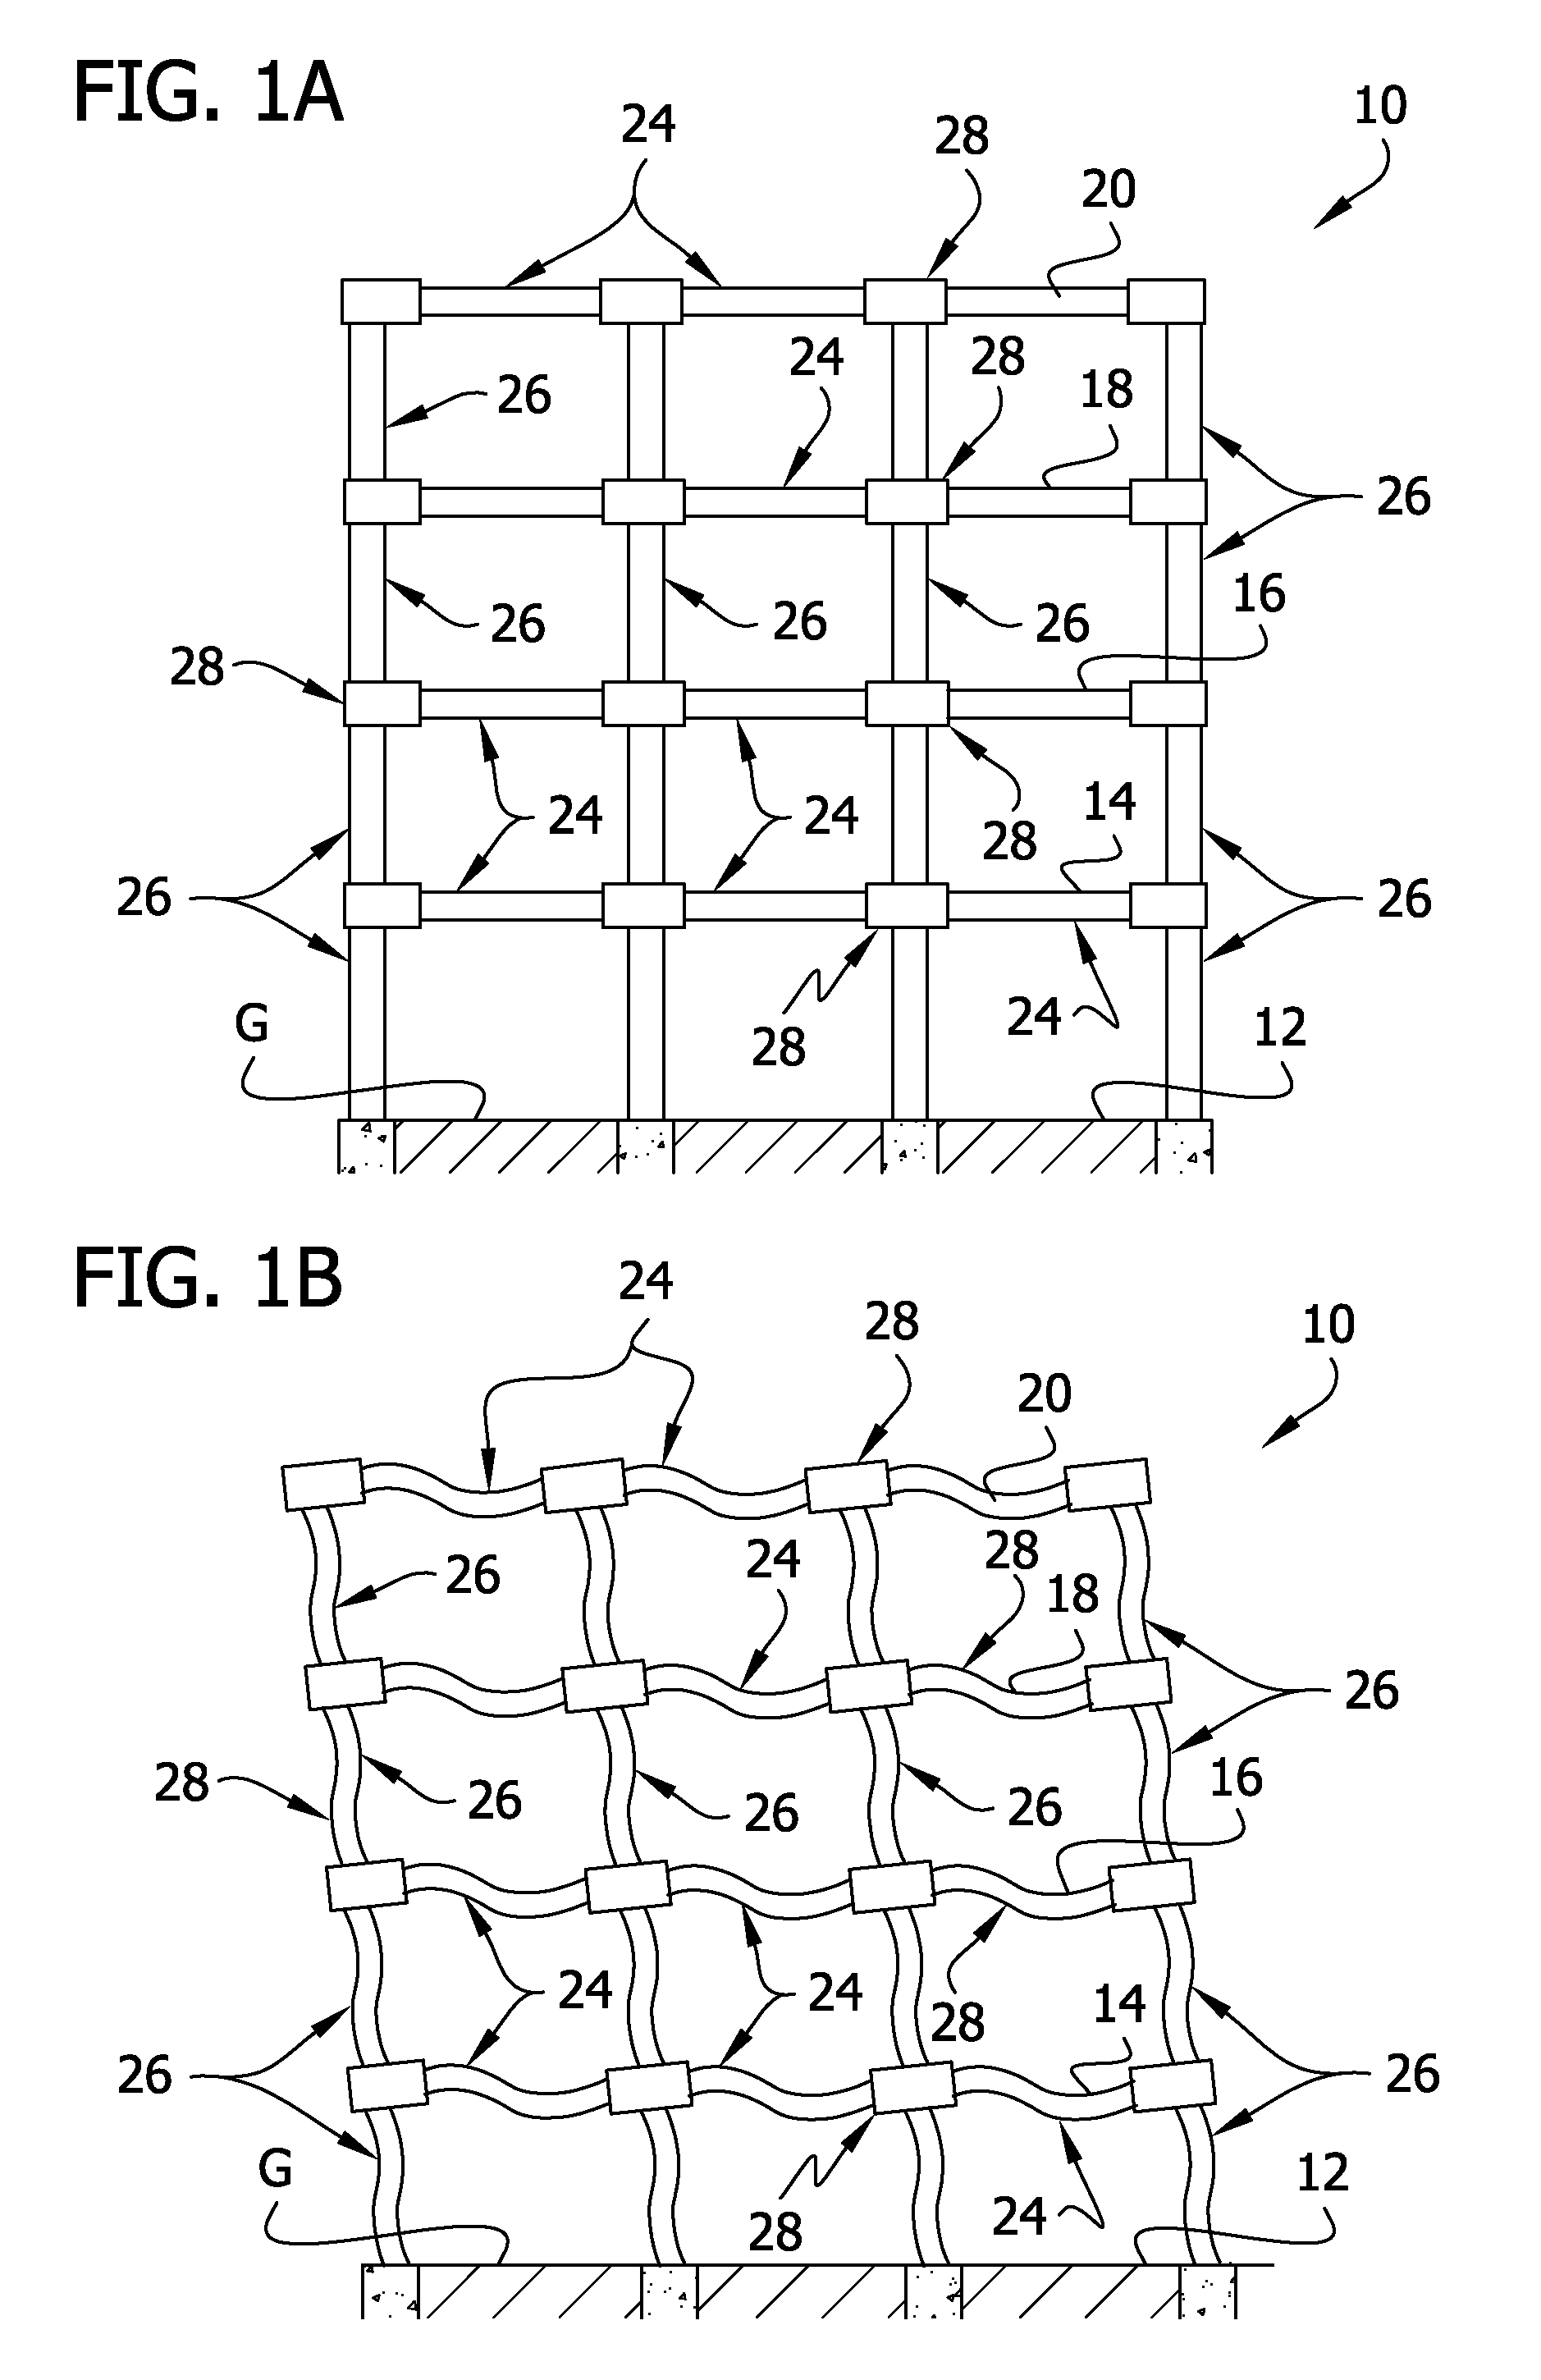 Building structure, method of making, and components